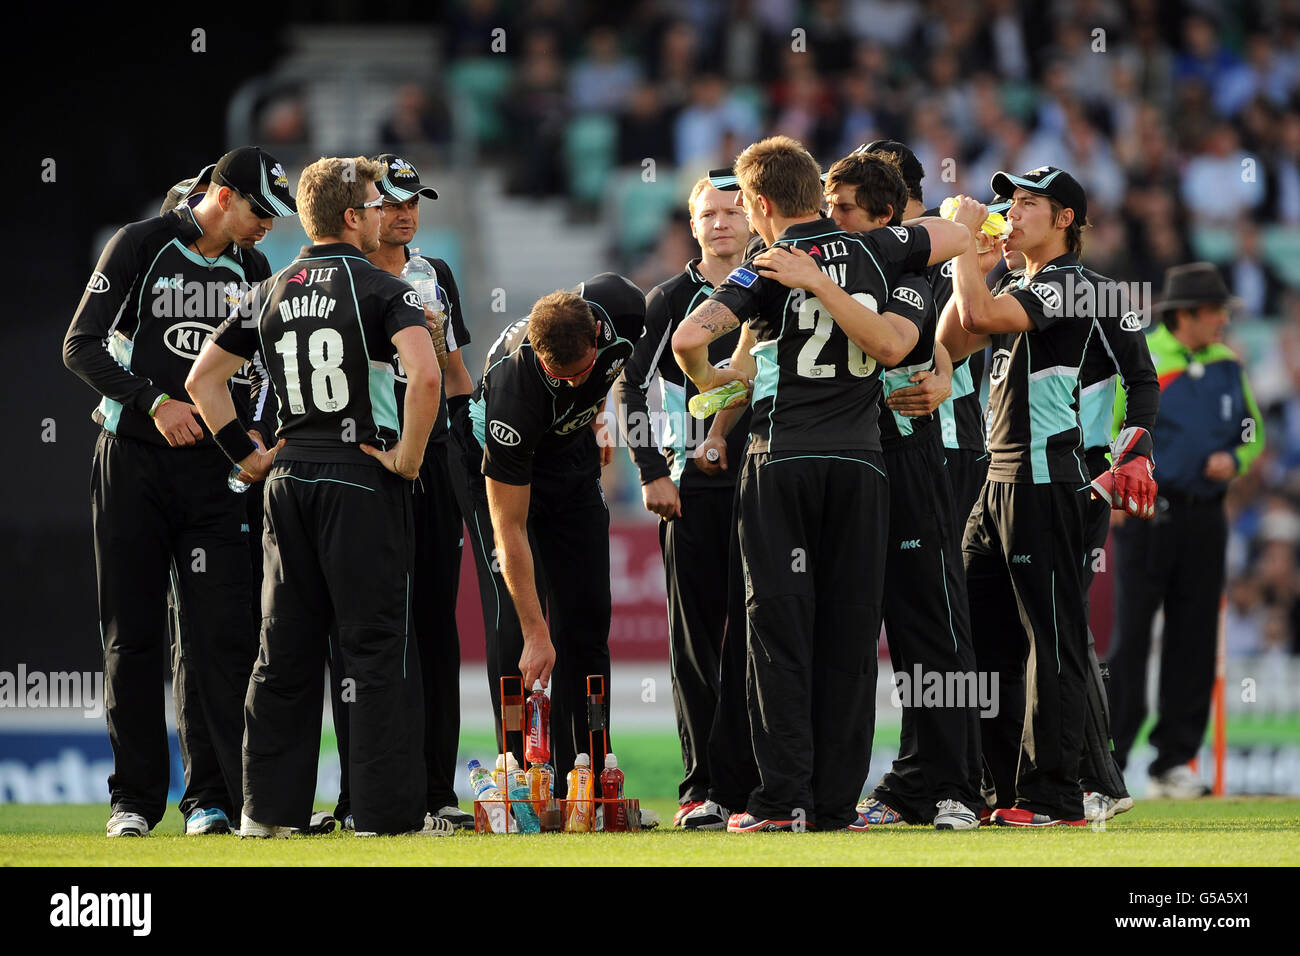 Surrey Lions players celebrate the wicket of Kent Spitfires' Azhar Mahmood Stock Photo